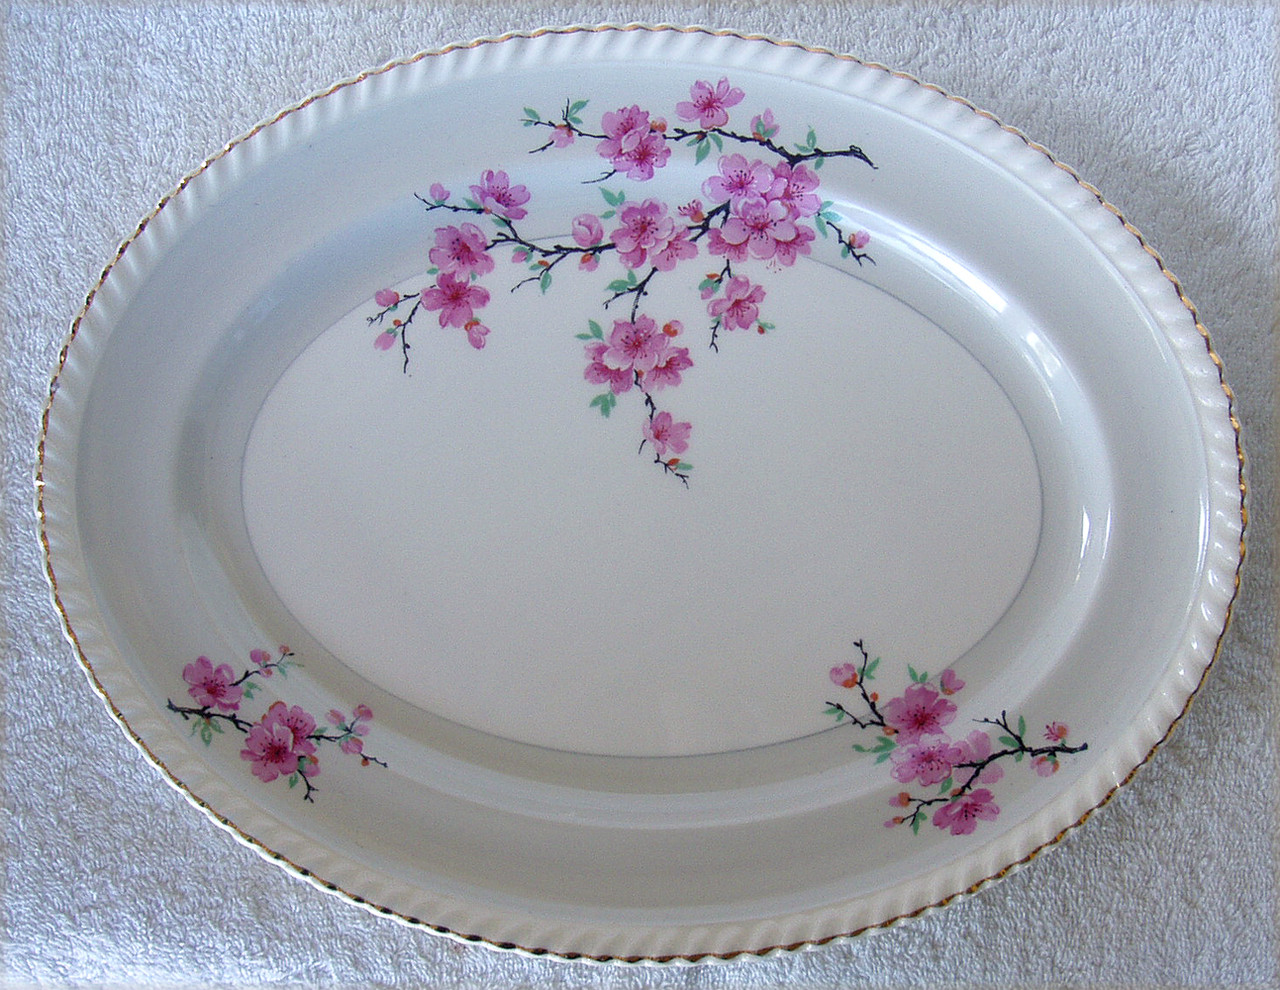 https://cdn11.bigcommerce.com/s-ly3sihrdwc/images/stencil/1280x1280/products/10531/56582/SANDWICH_SERVING_PLATE_Old_English_Porcelain_JOHNSON_BROTHERS_Cherry_Blossoms_JB734_Hand_Decorated__67761.1690856541.jpg?c=2